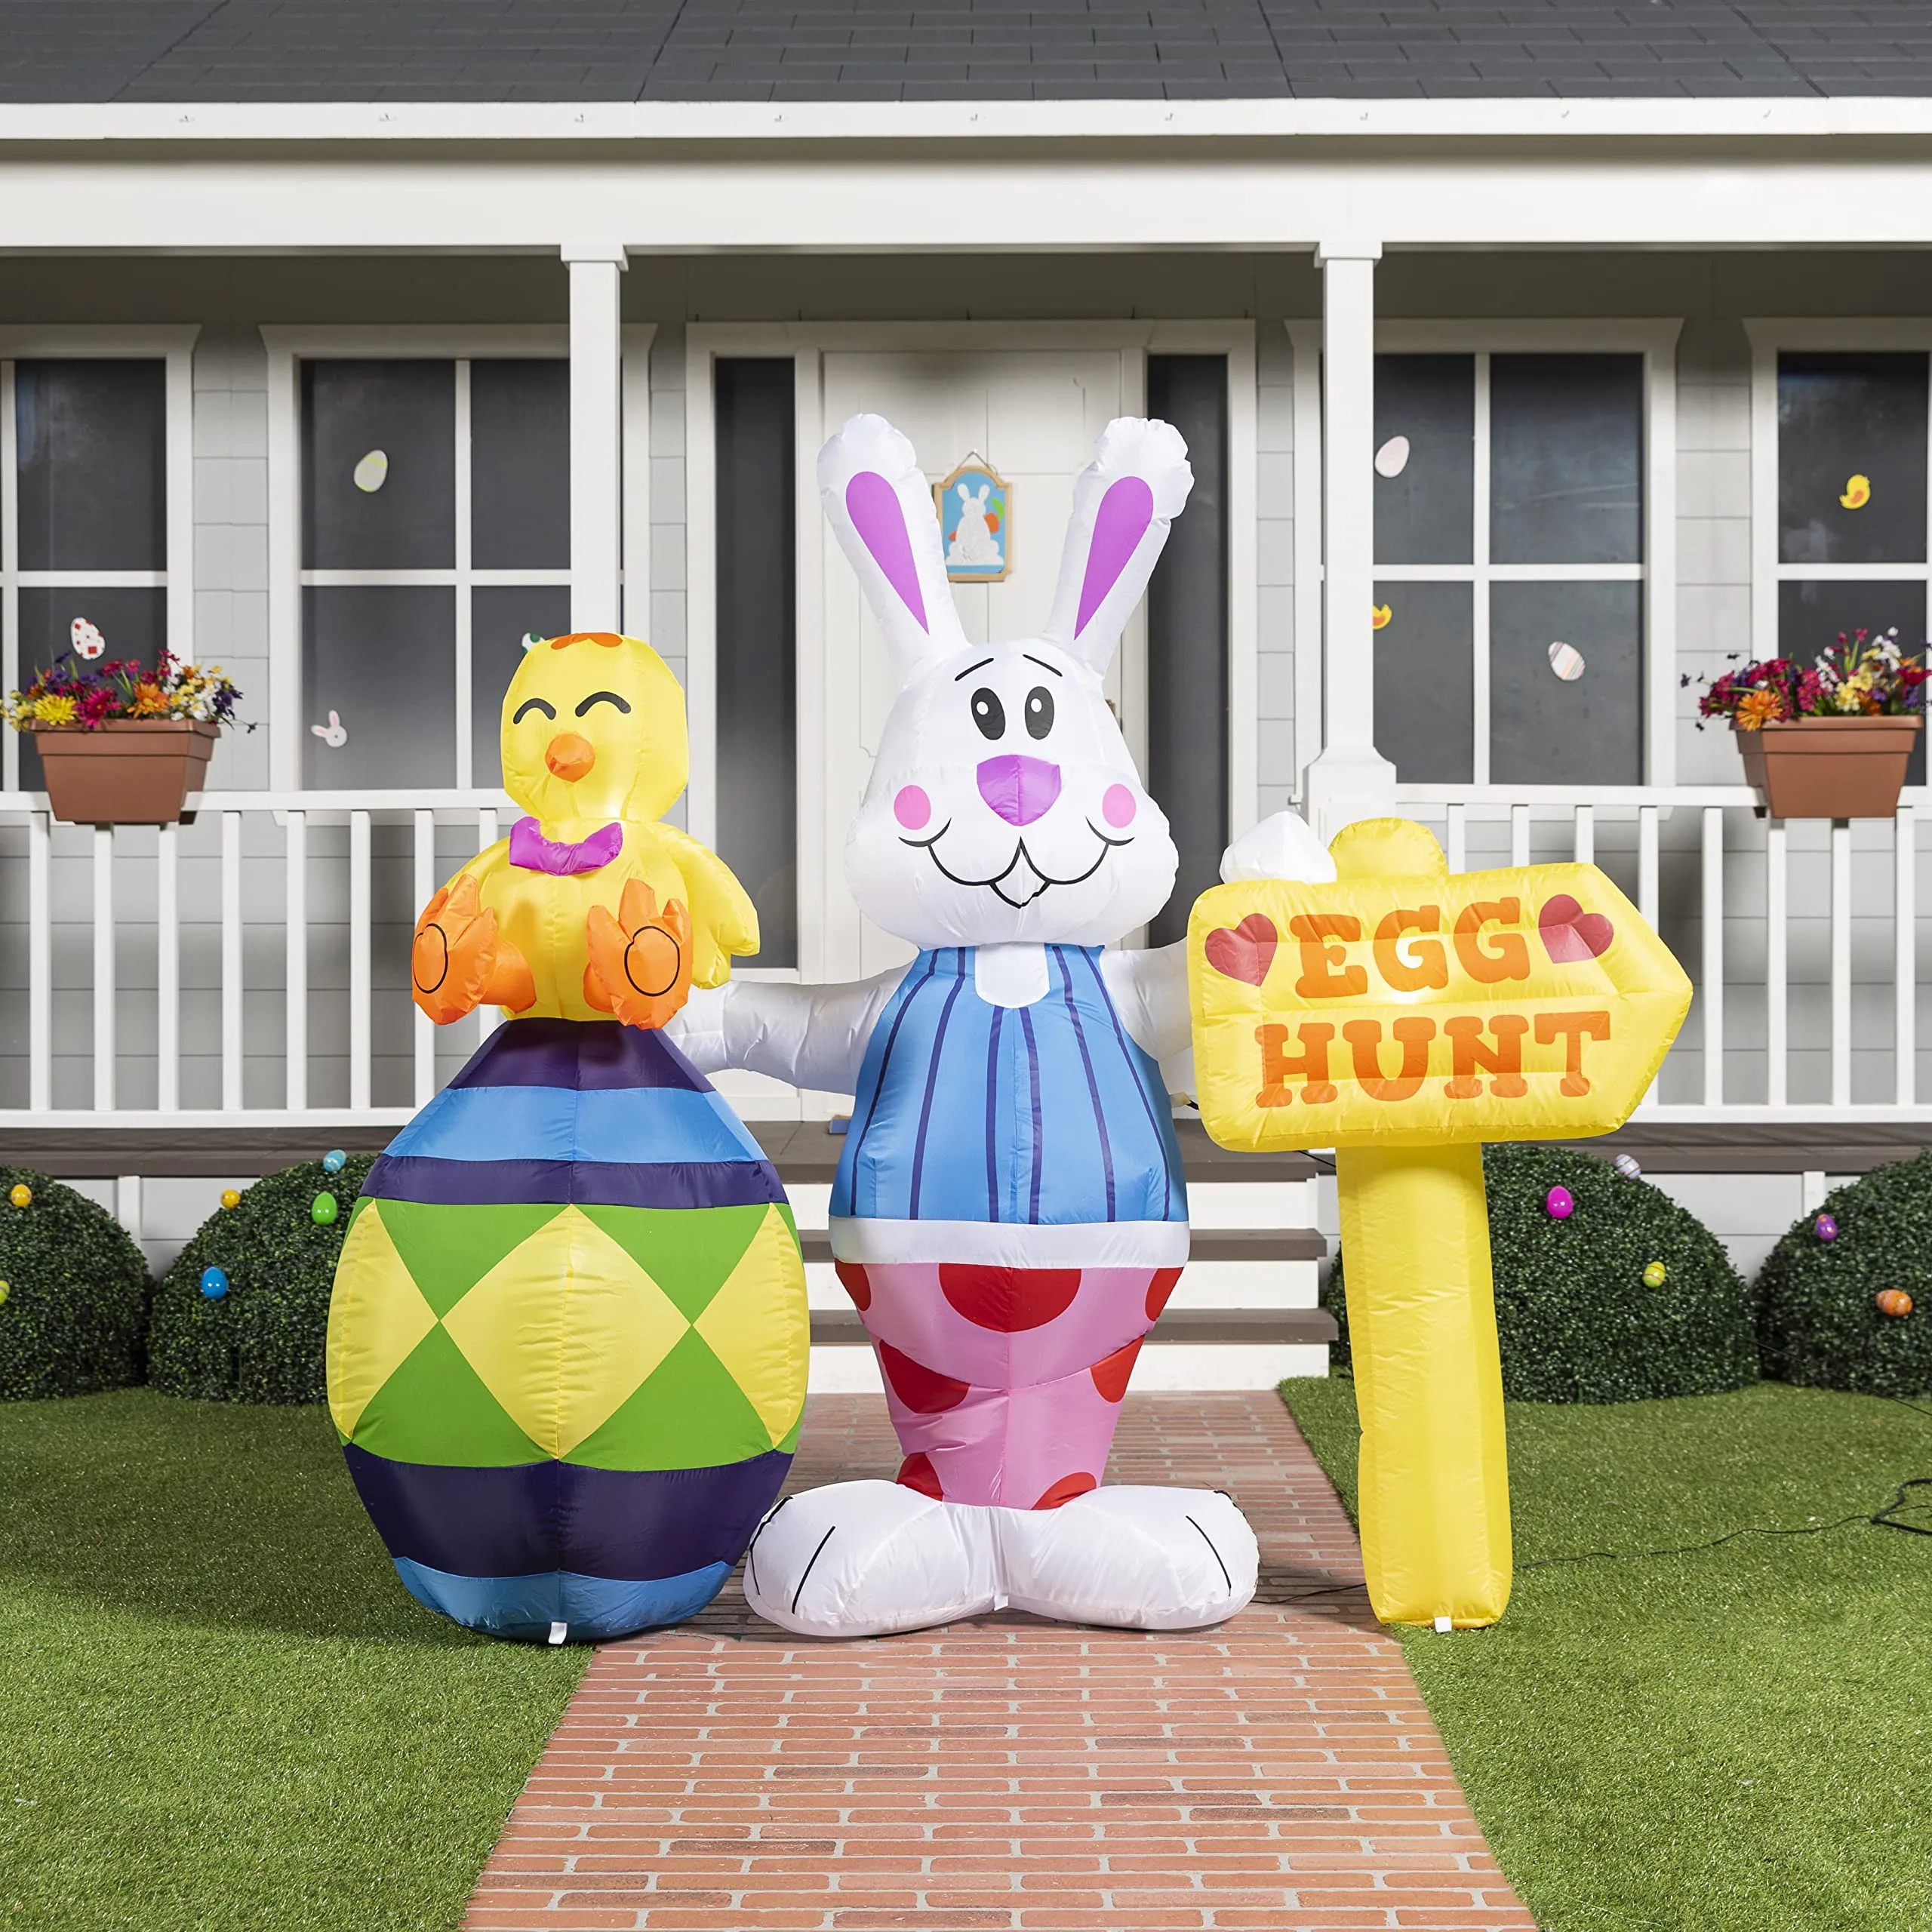 You are currently viewing Repurposing Household Items for Quirky Easter Decorations